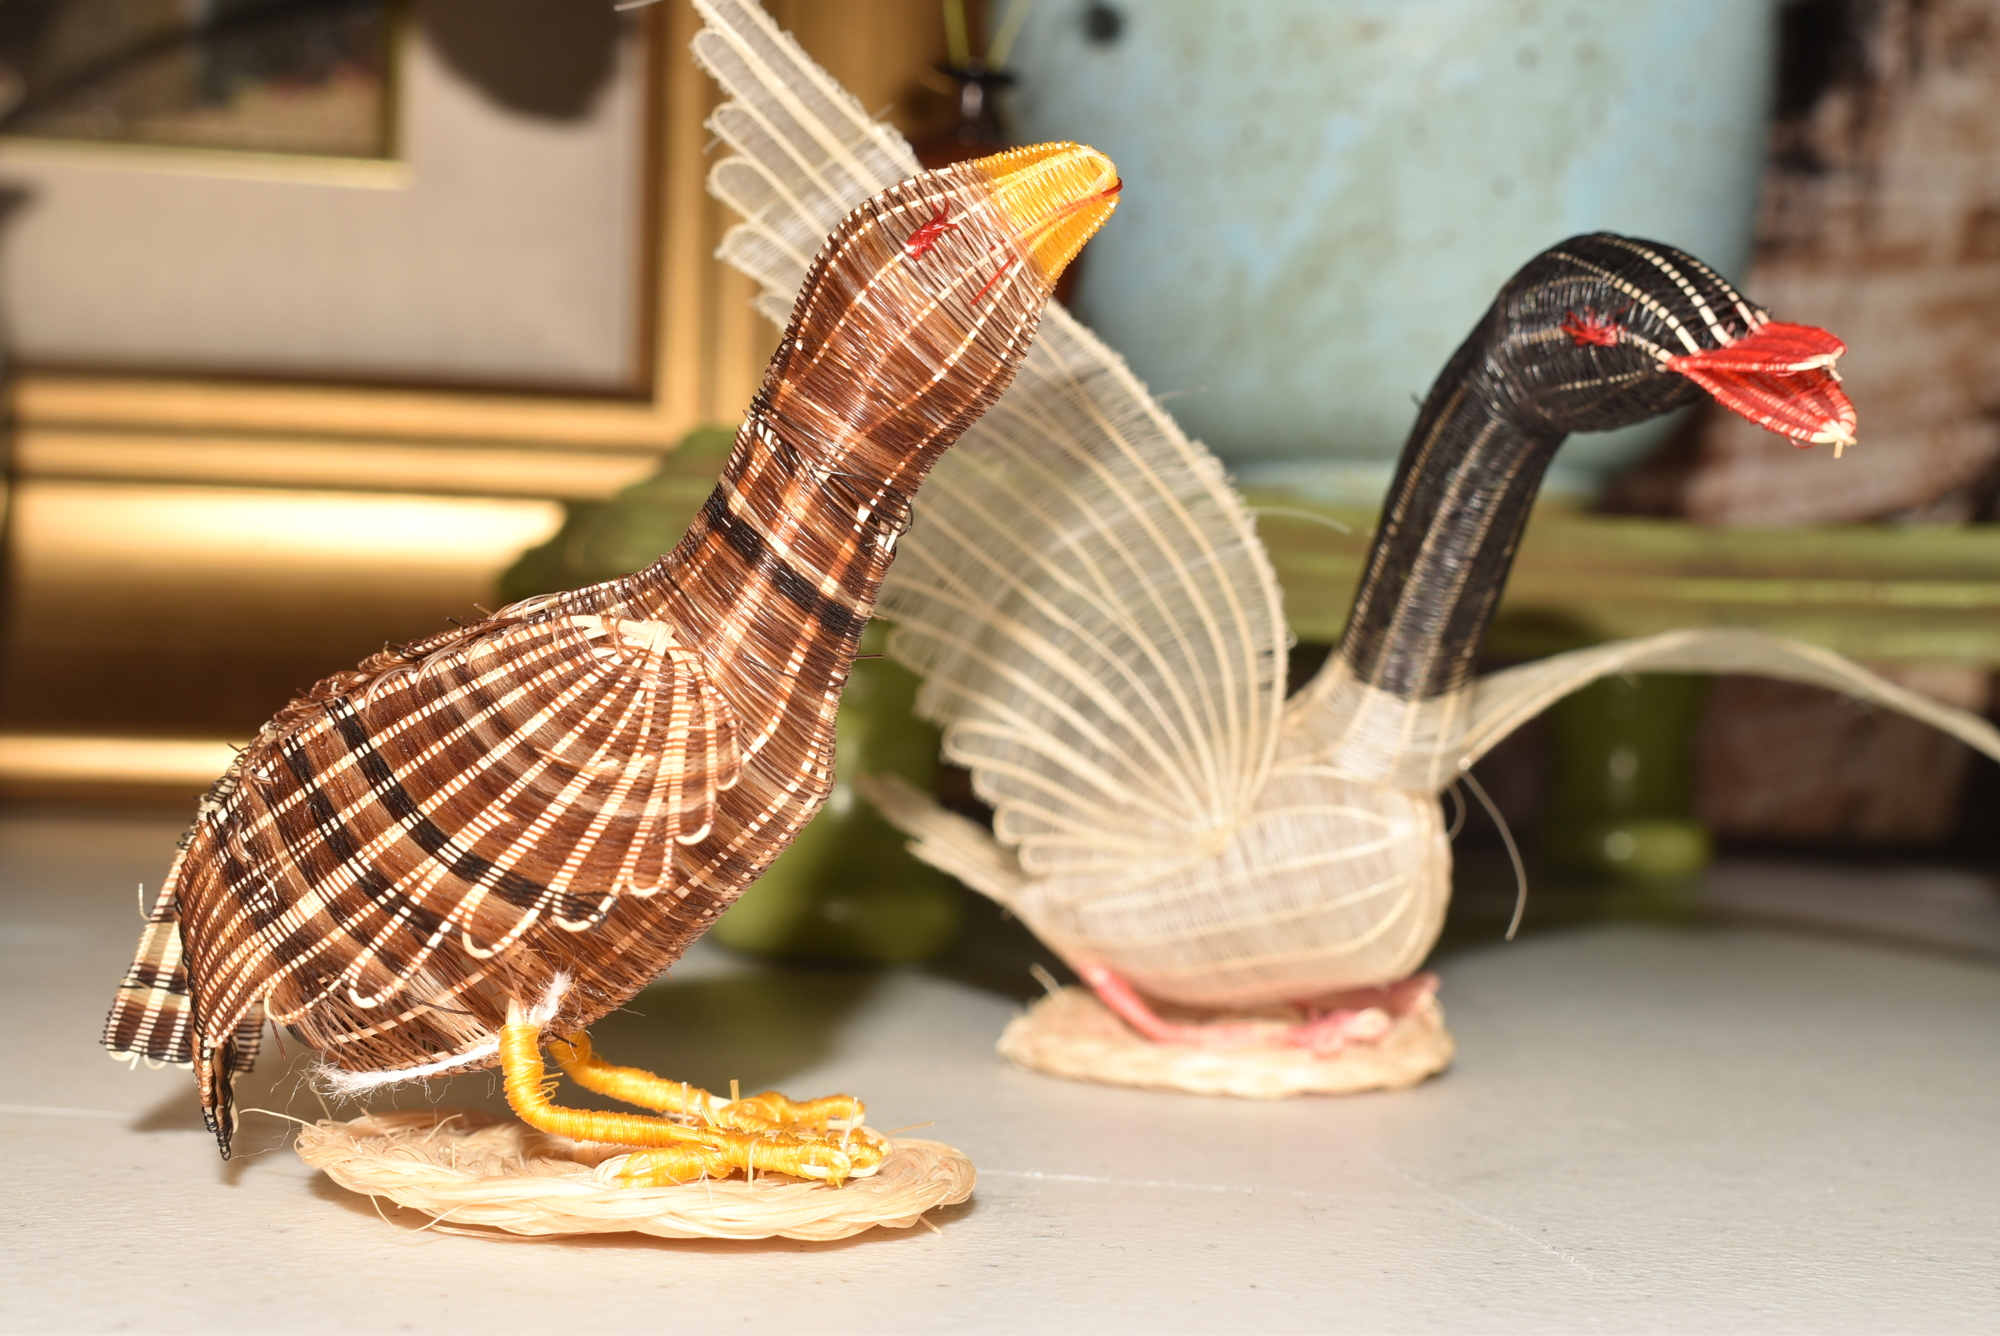 Tiny hand-woven ducks are among the donations.